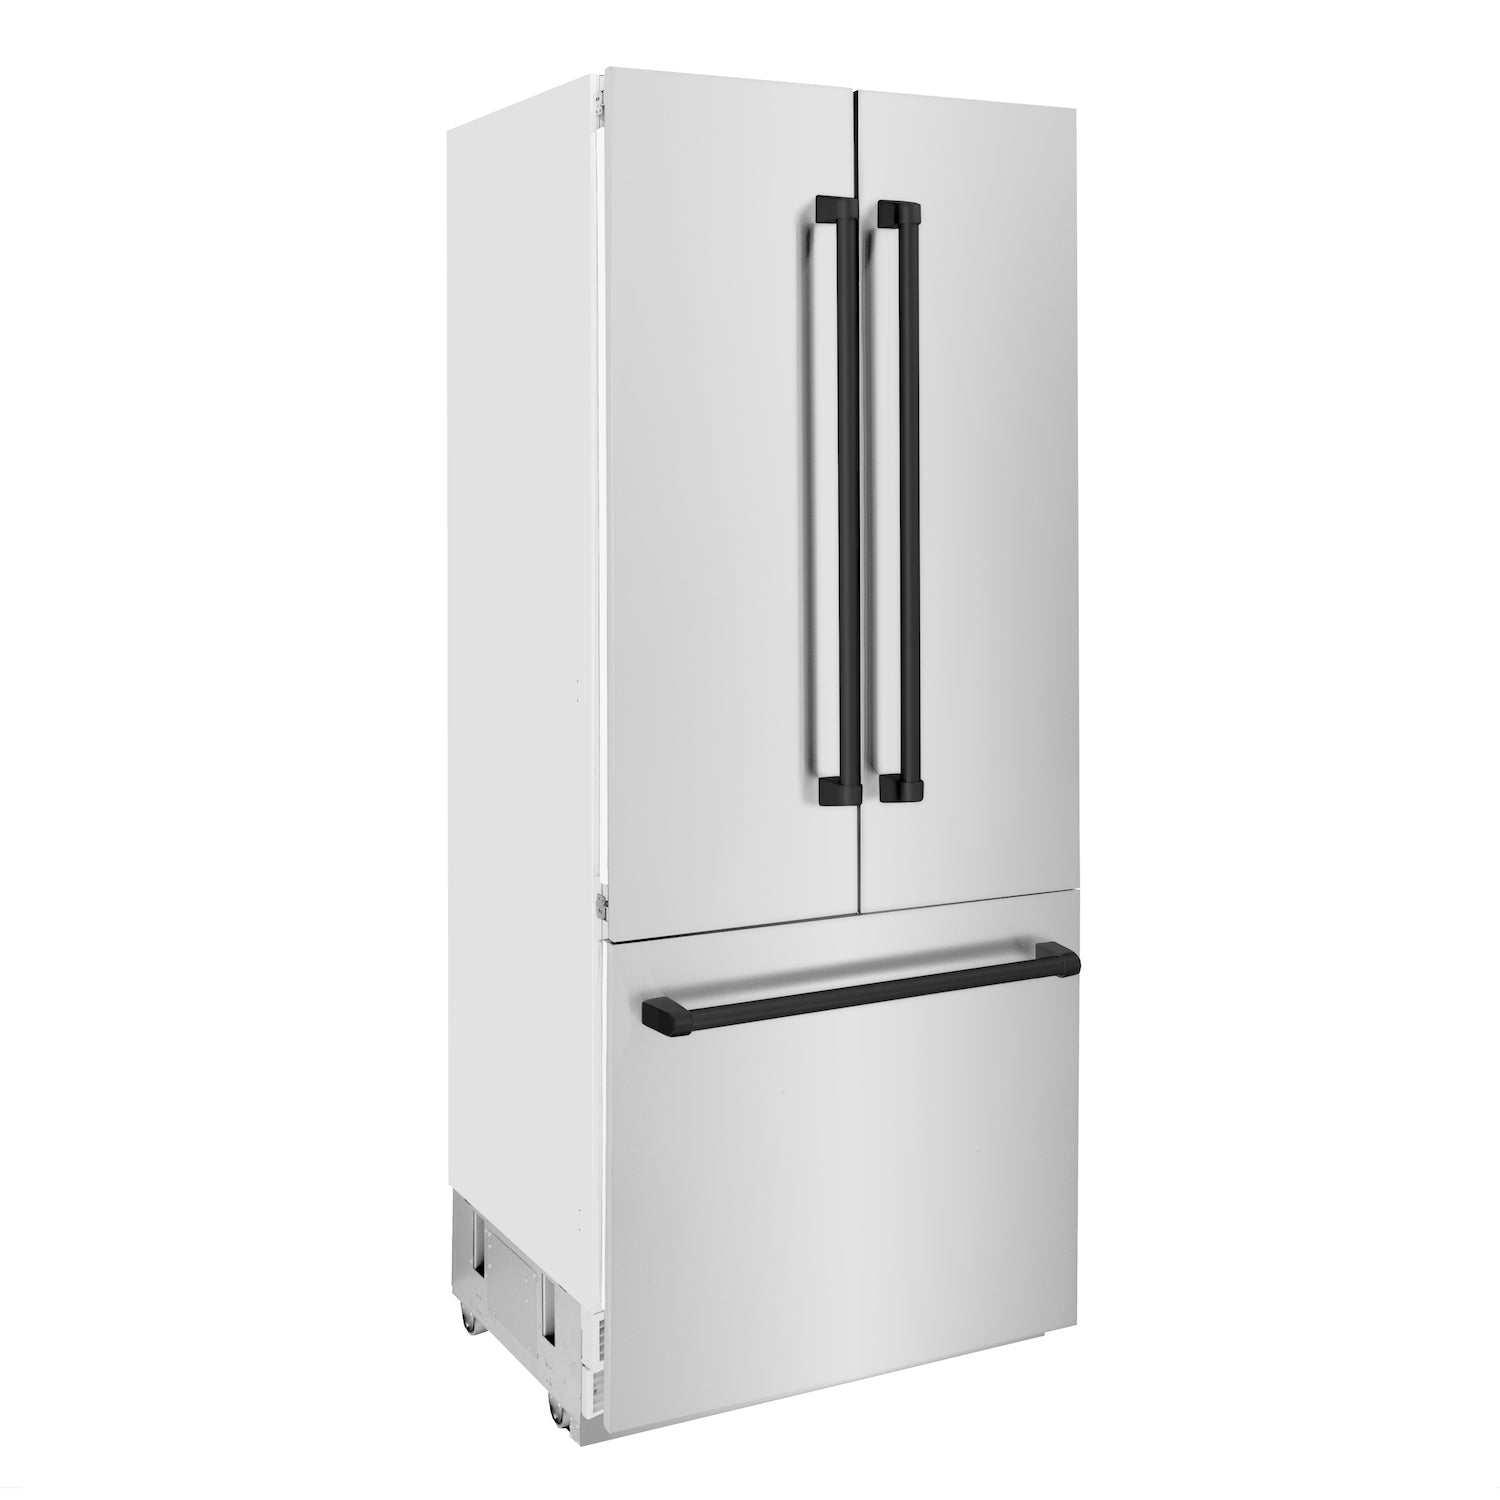 ZLINE 36" Autograph Edition Built-in Refrigerator with Accent Handle side.